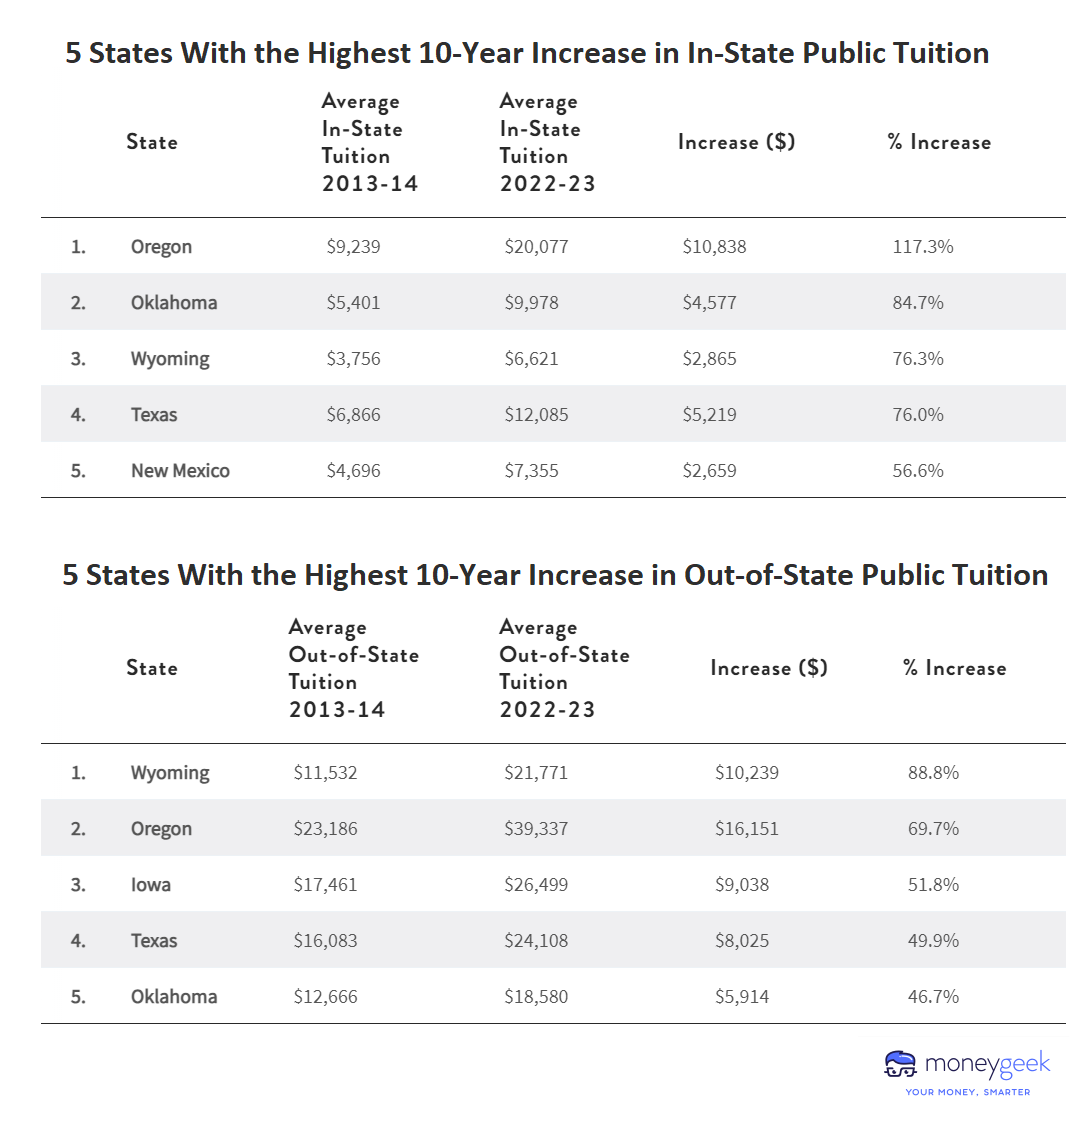 Two charts showing 5 States With The Highest 10-Year Increase In In-State Public Tuition & 5 States With The Highest 10-Year Increase In Out-Of-State Public Tuition